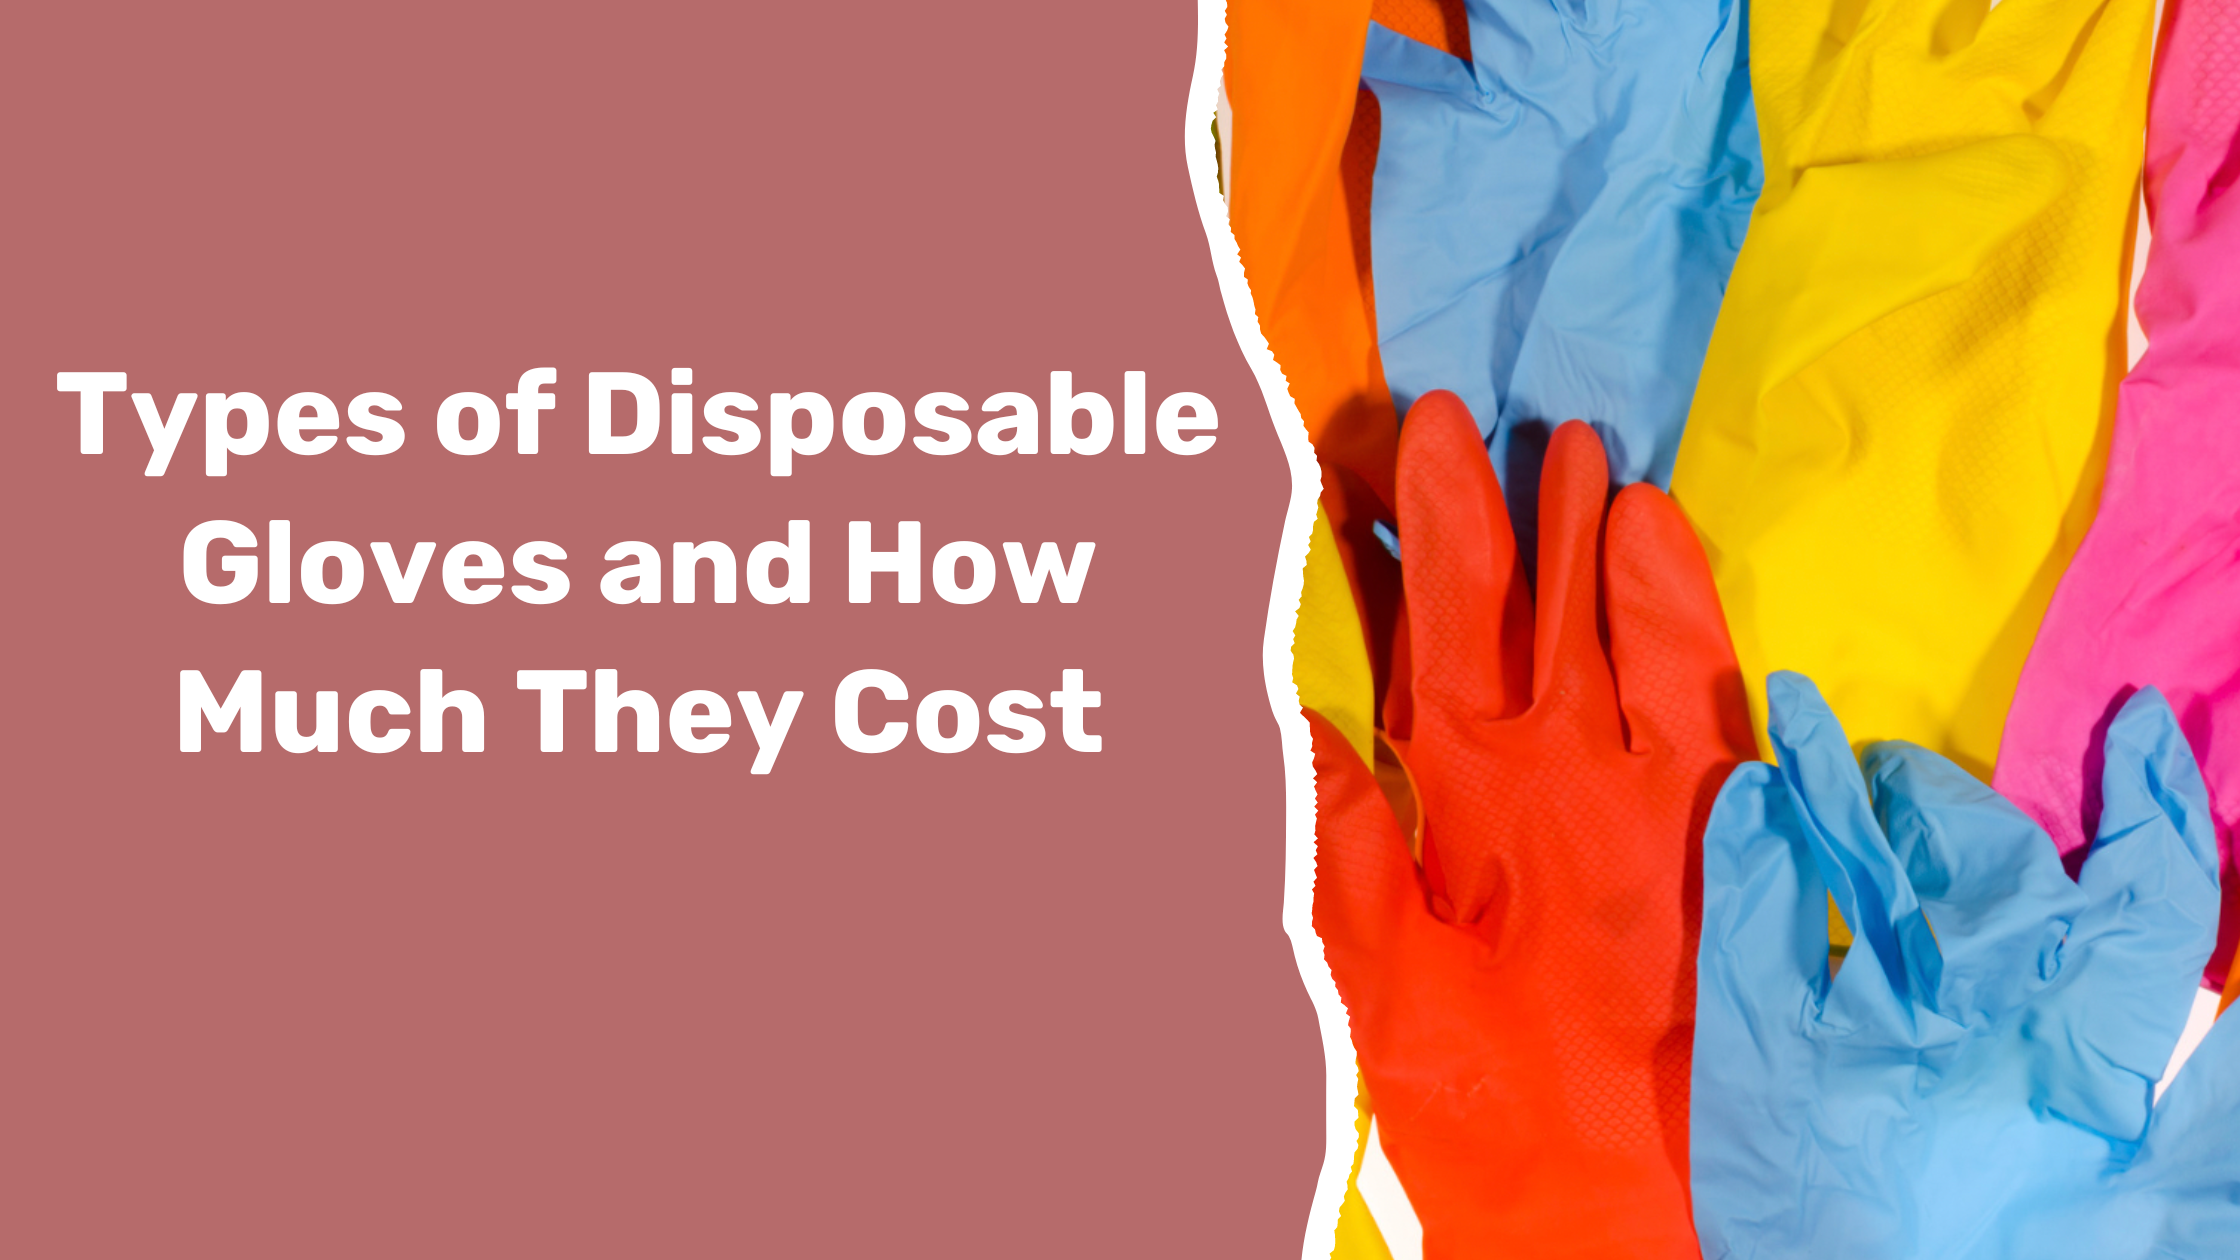 Types of Disposable Gloves and How Much They Cost